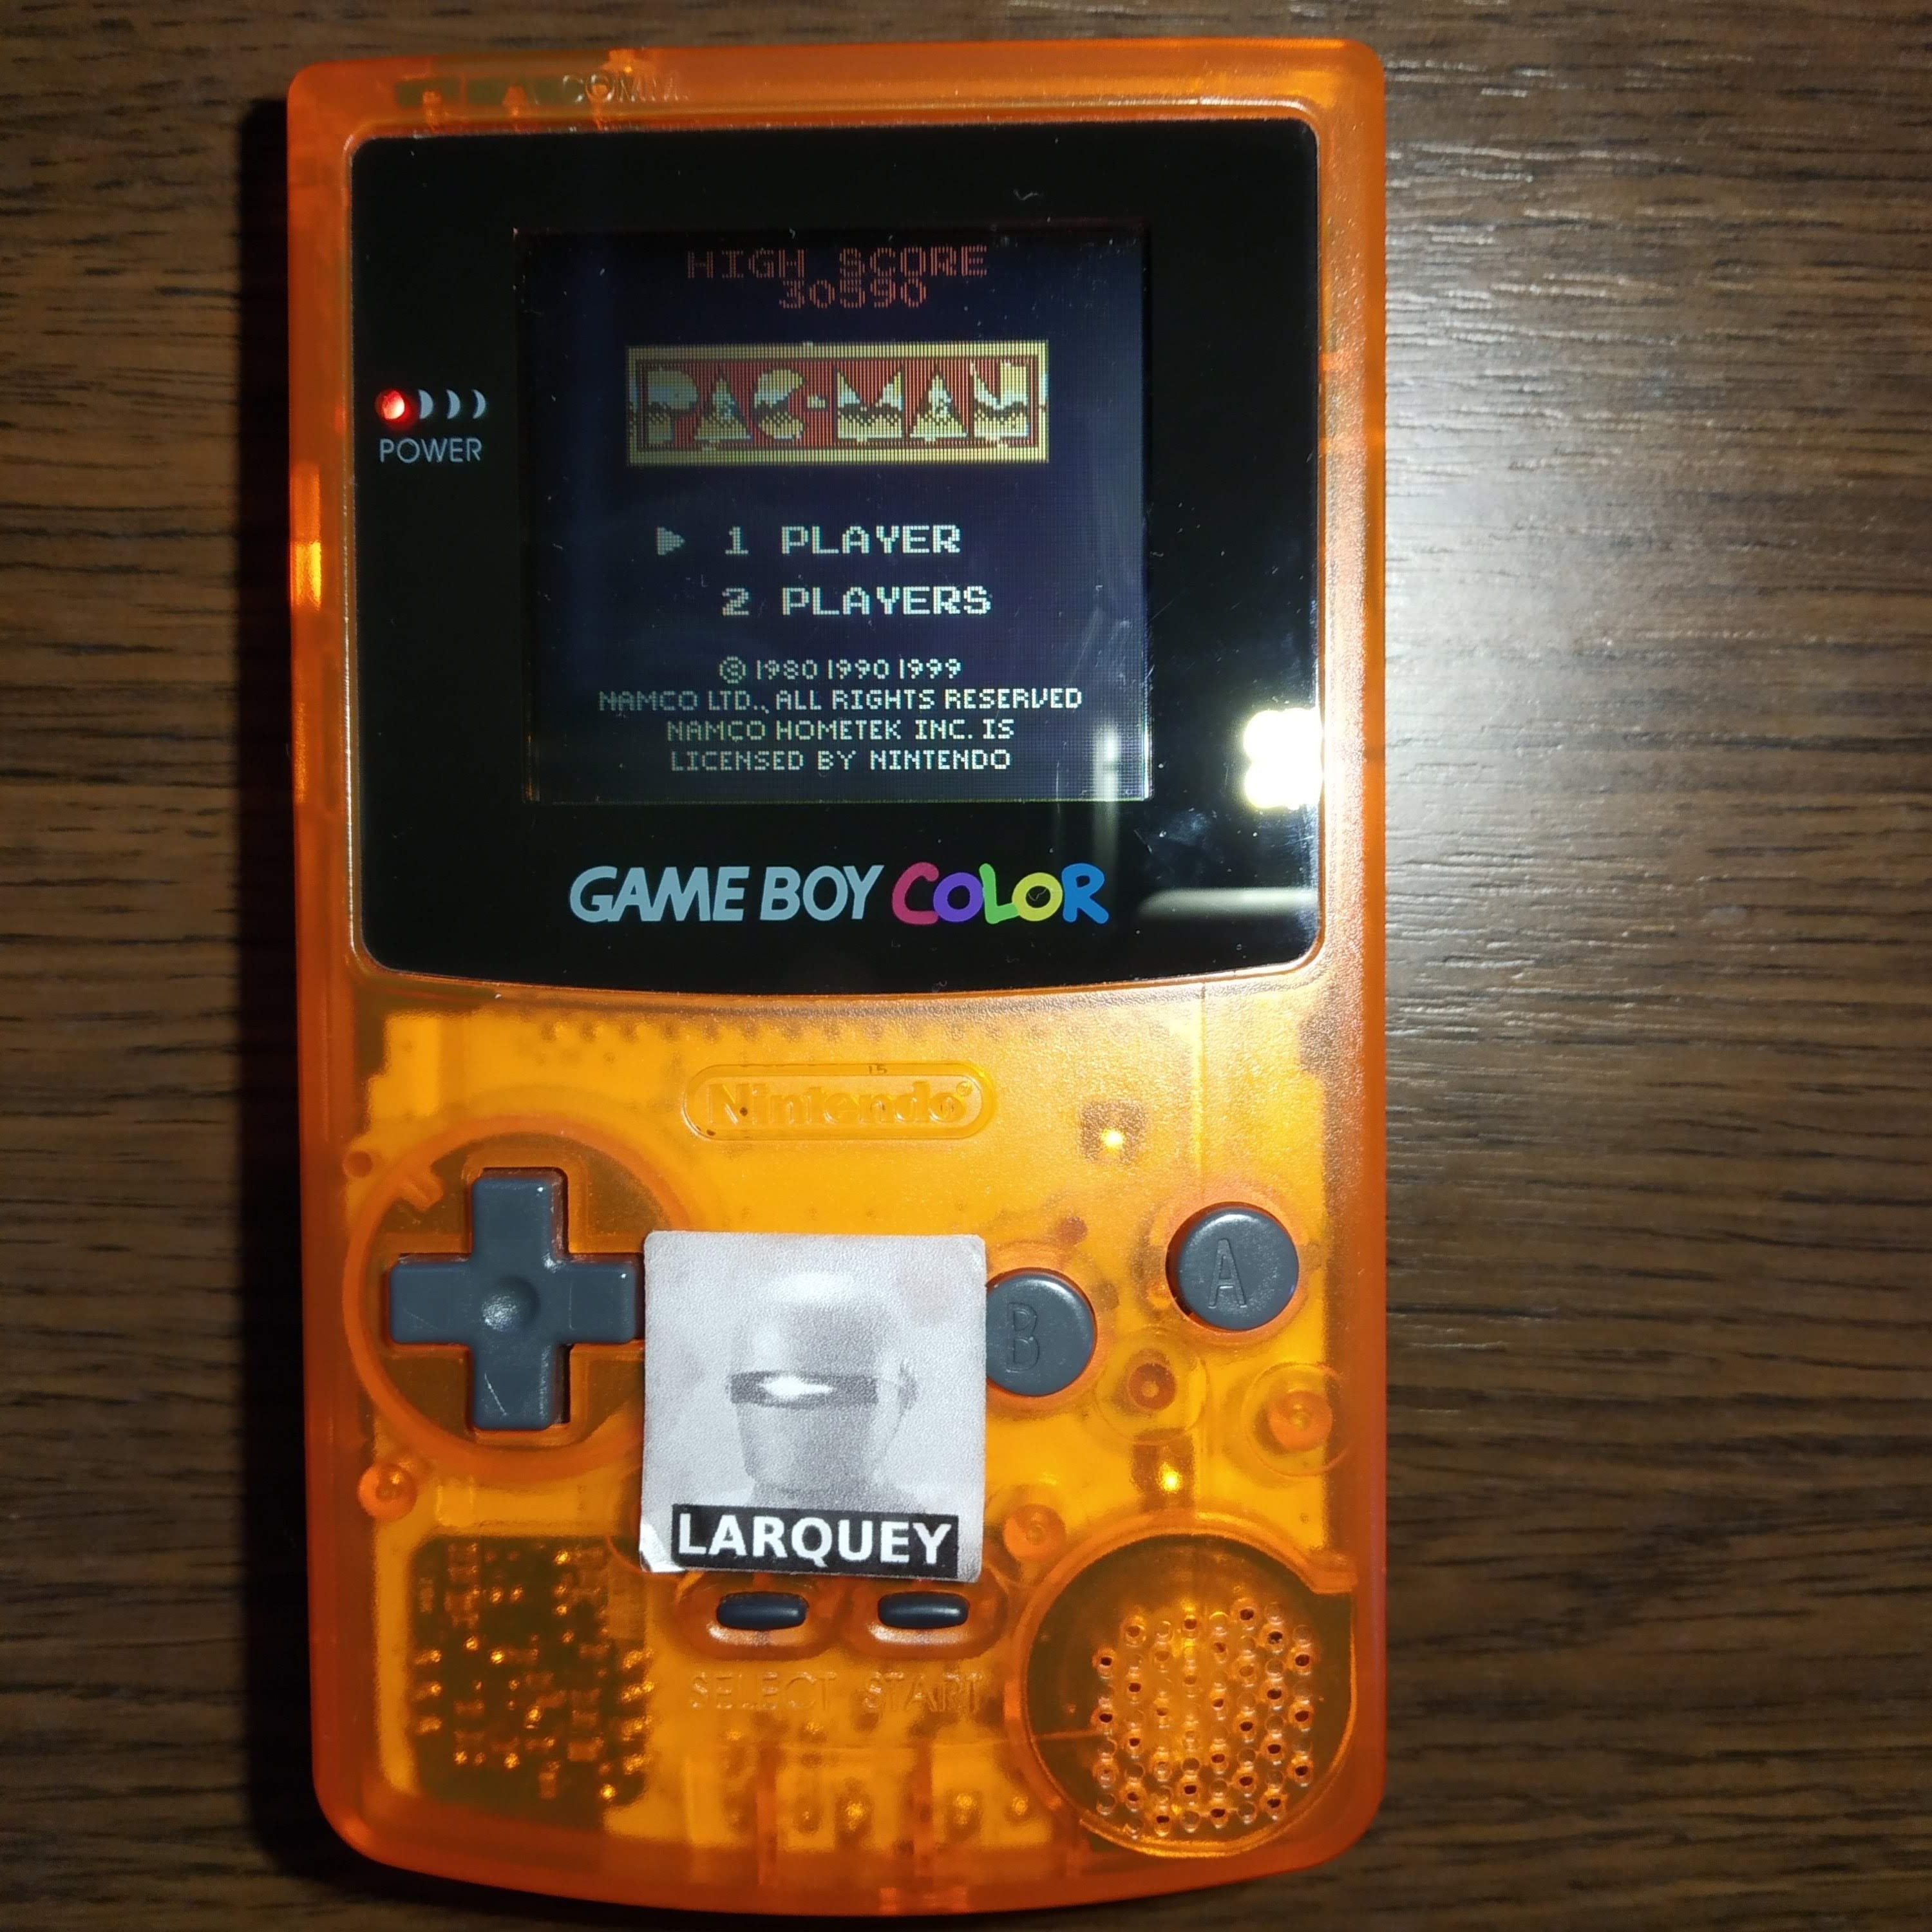 Larquey: Pac-Man: Special Color Edition (Game Boy Color) 30,590 points on 2020-07-23 09:54:08